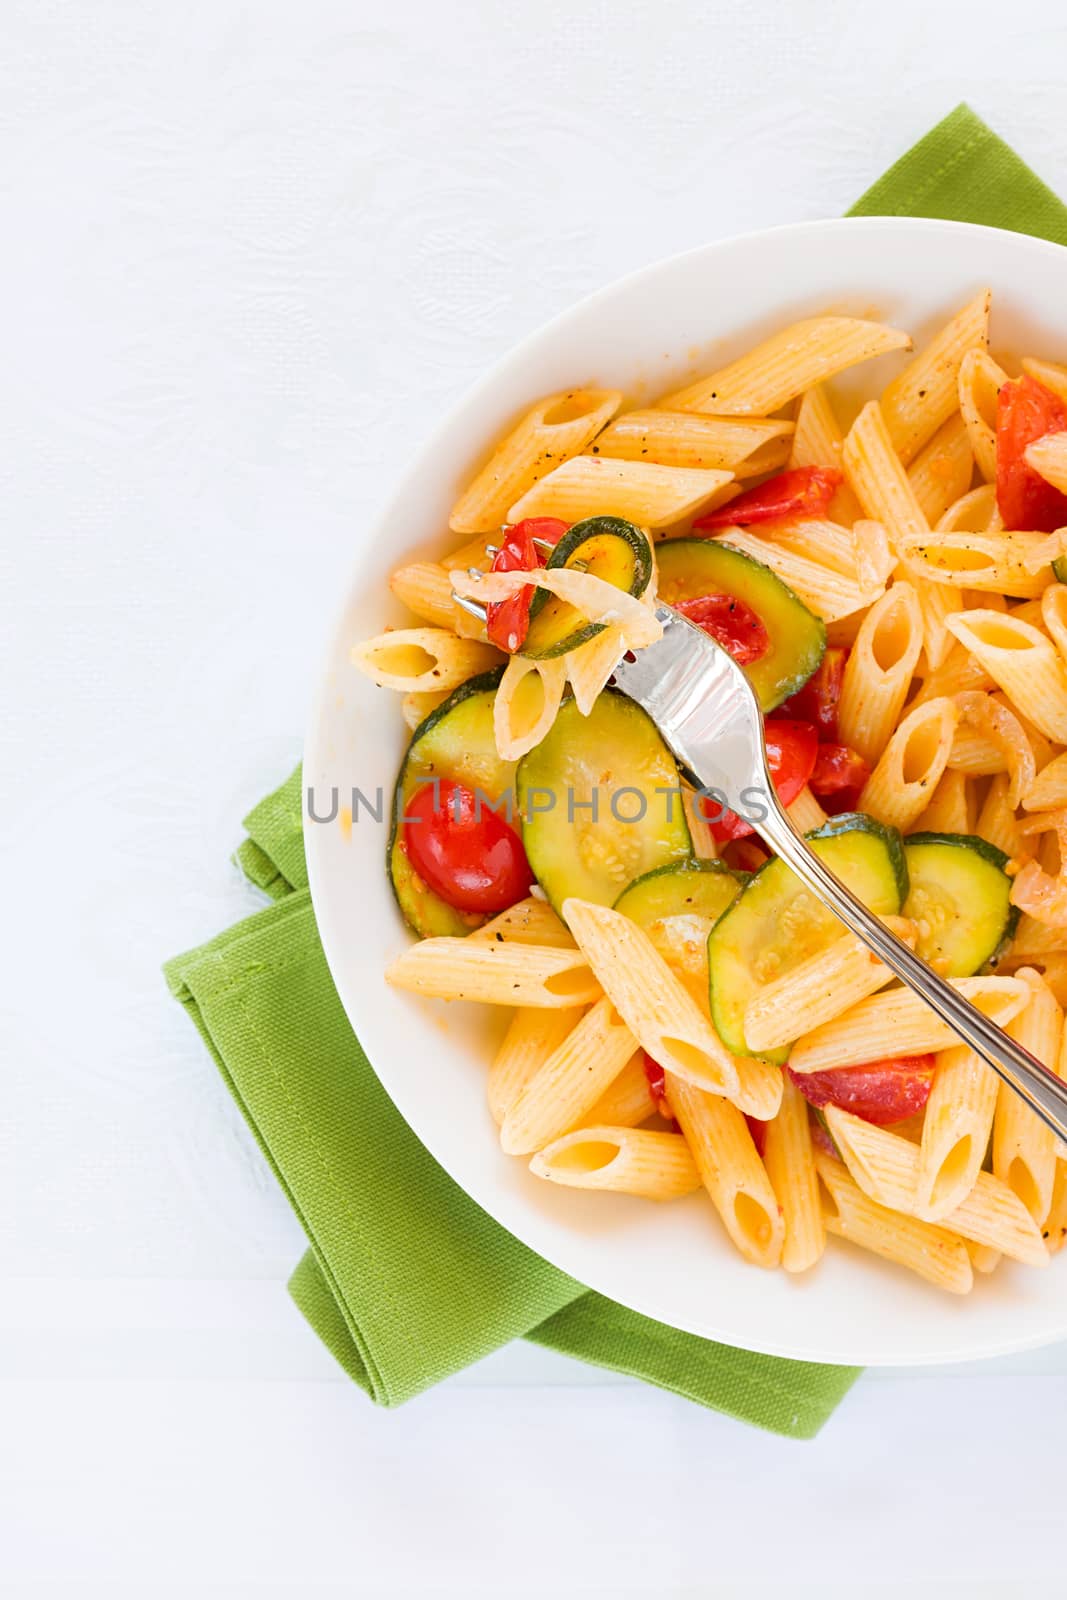 Traditional italian penne pasta with zucchini and cherry tomatoes seasoned with oil and black pepper seen from above